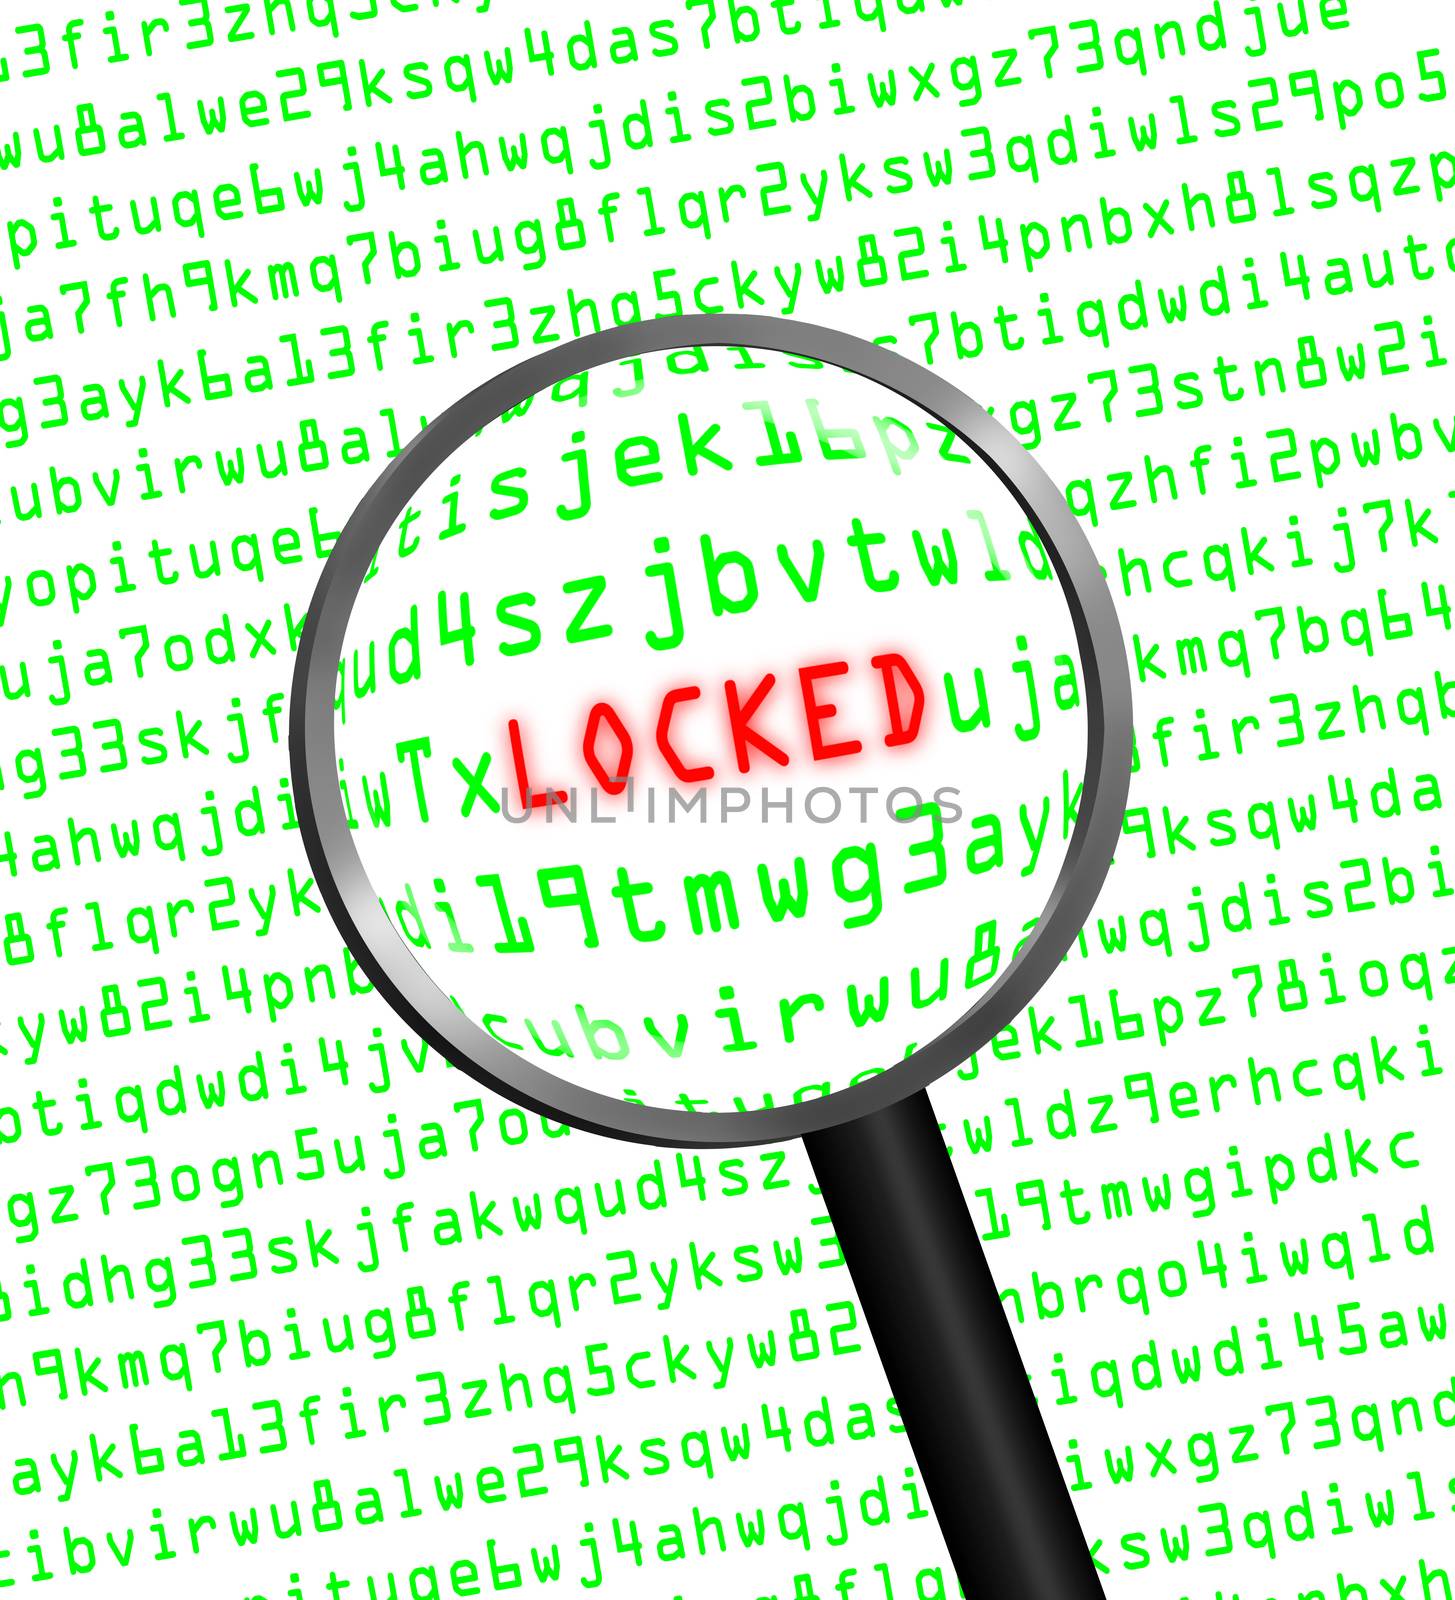 "LOCKED" revealed in computer code through a magnifying glass  by Balefire9